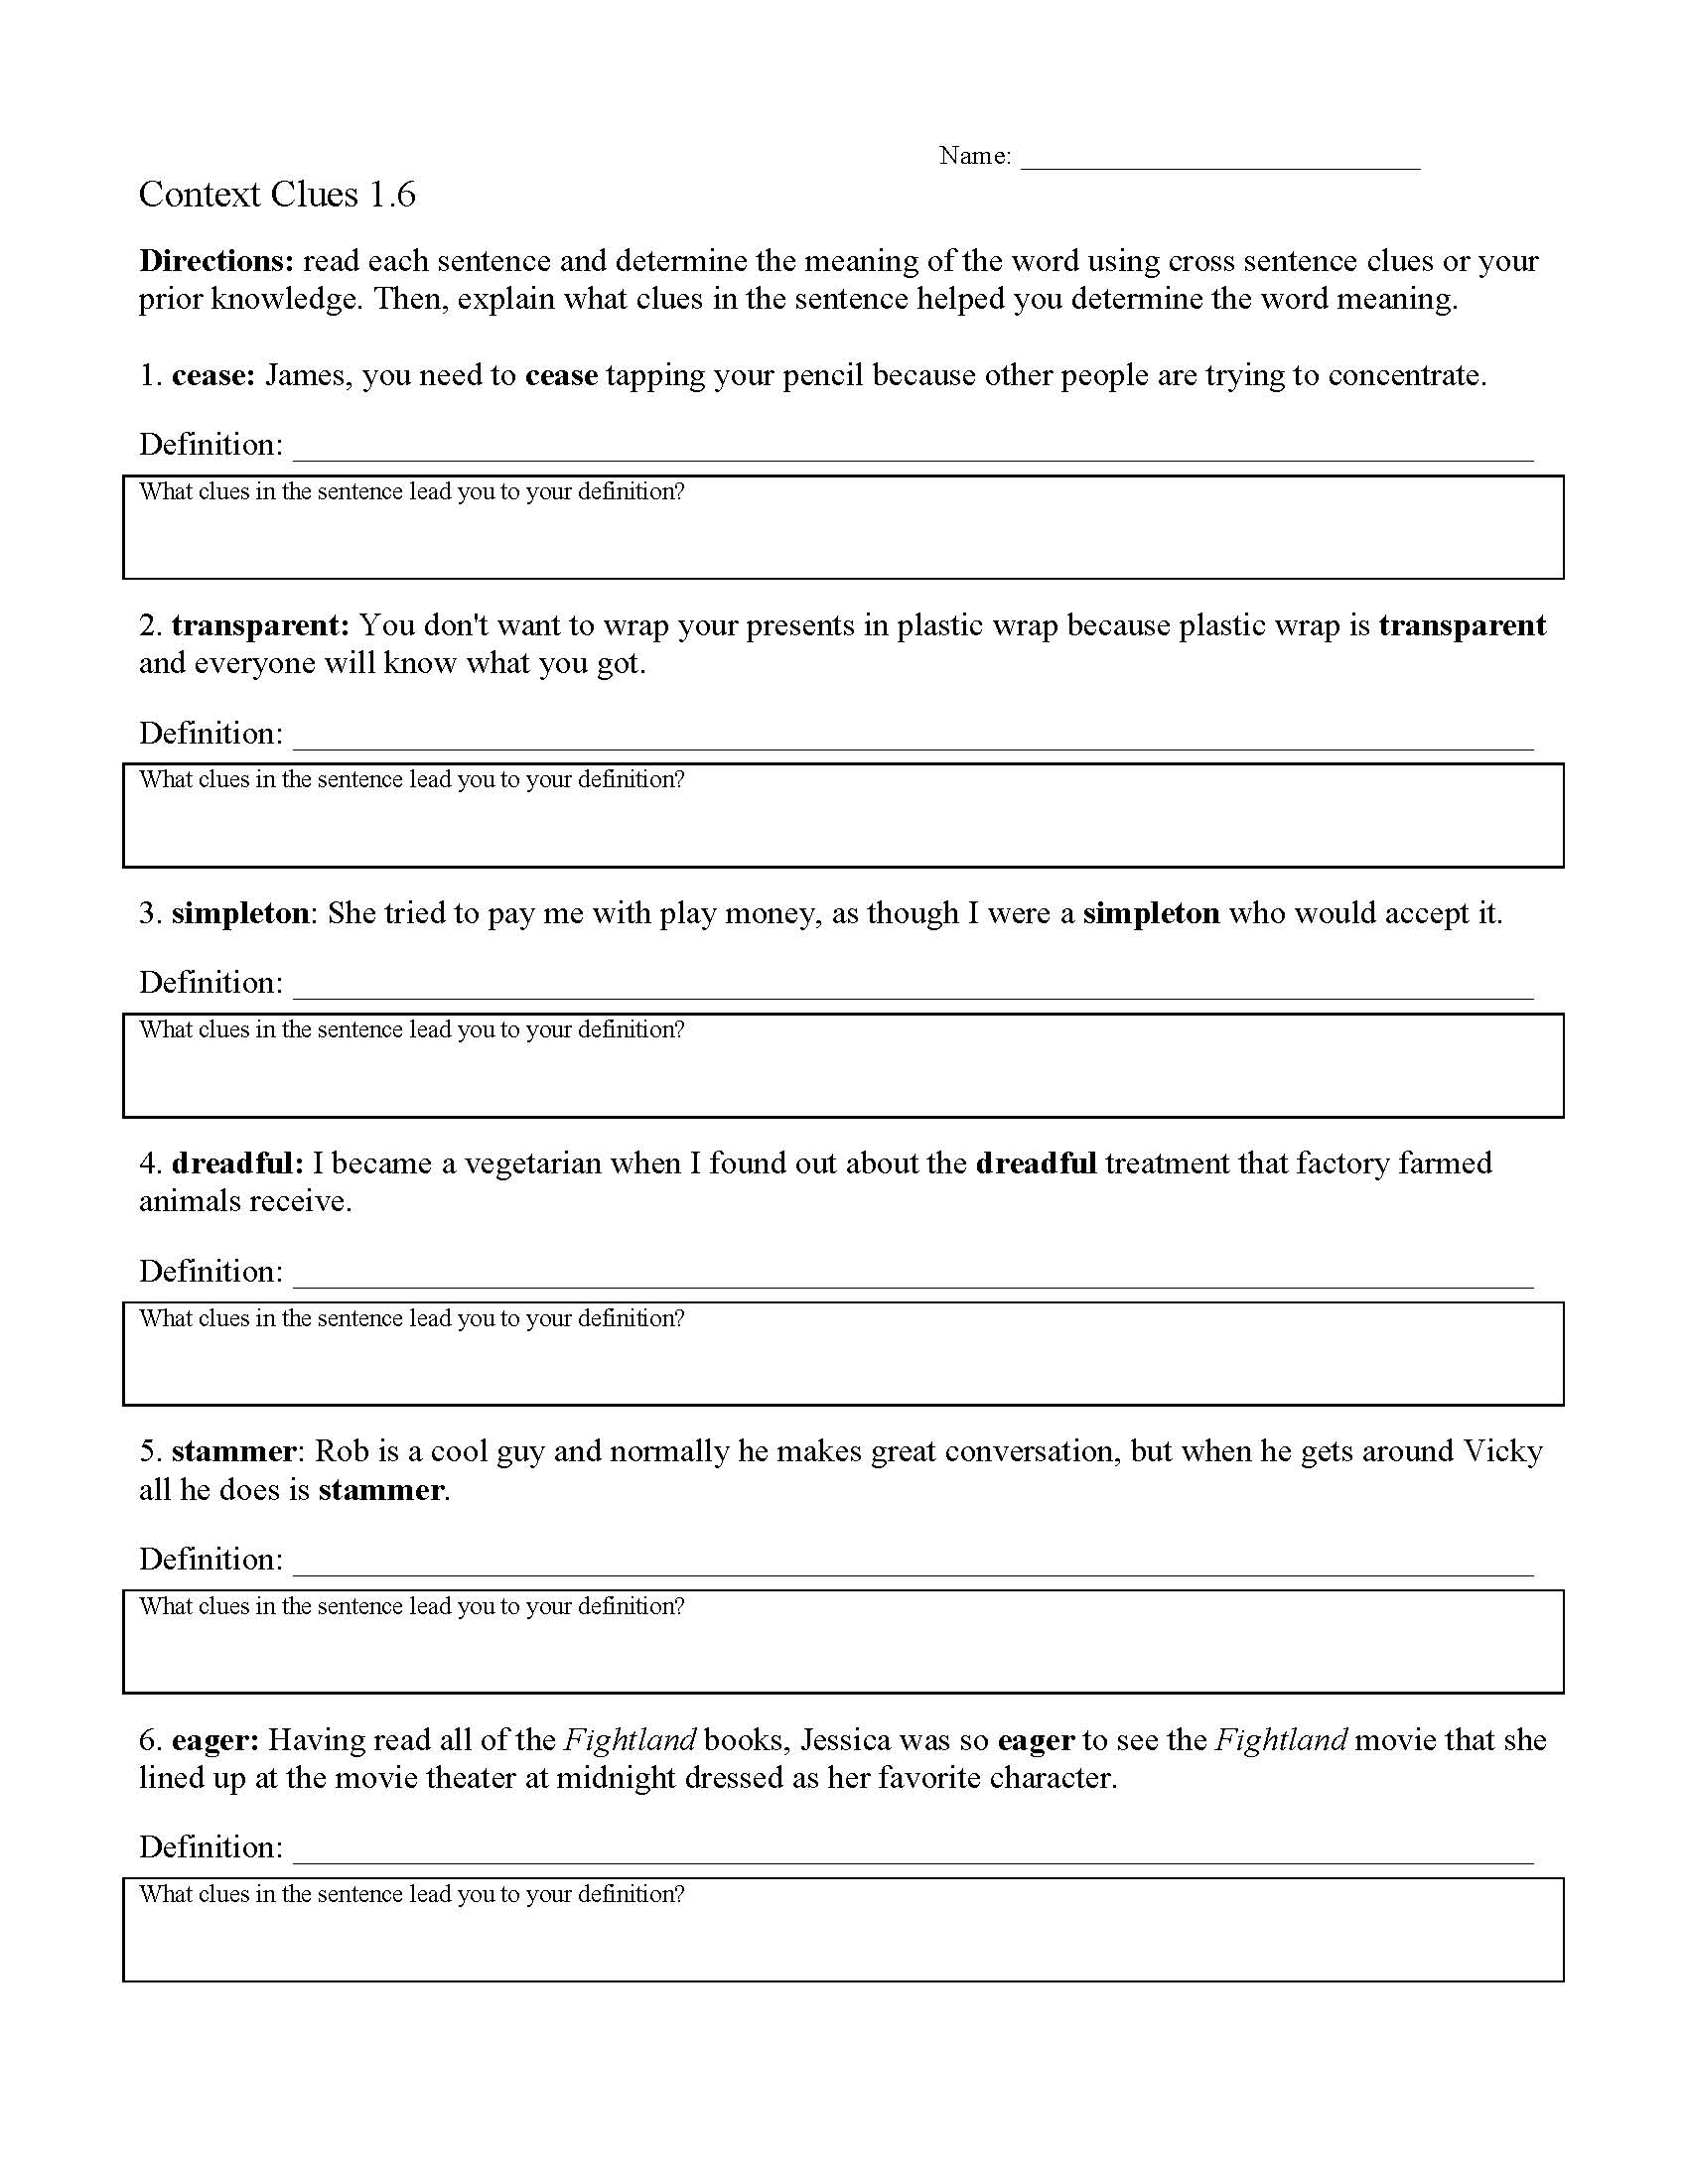 Context Clues Worksheets  Ereading Worksheets Pertaining To The Core Movie Worksheet Answers